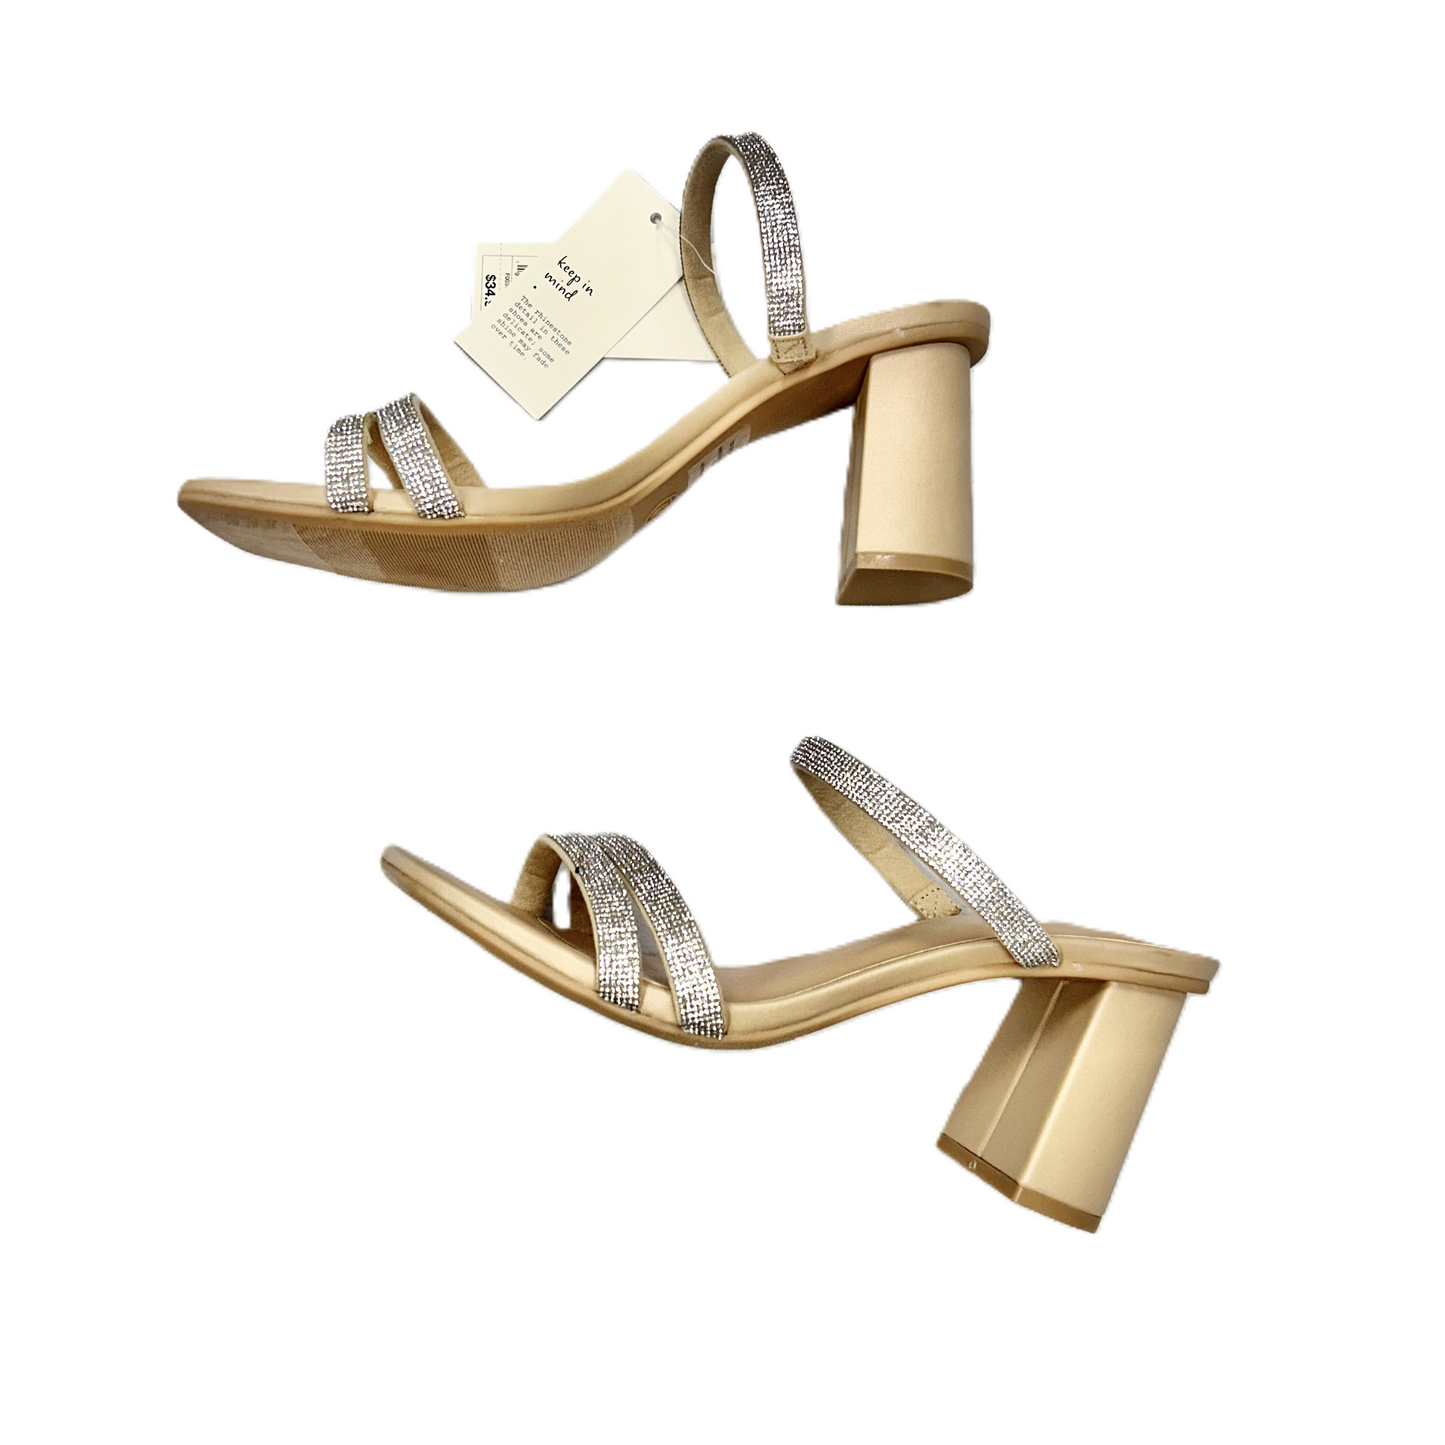 Tan Sandals Heels Block By A New Day, Size: 9